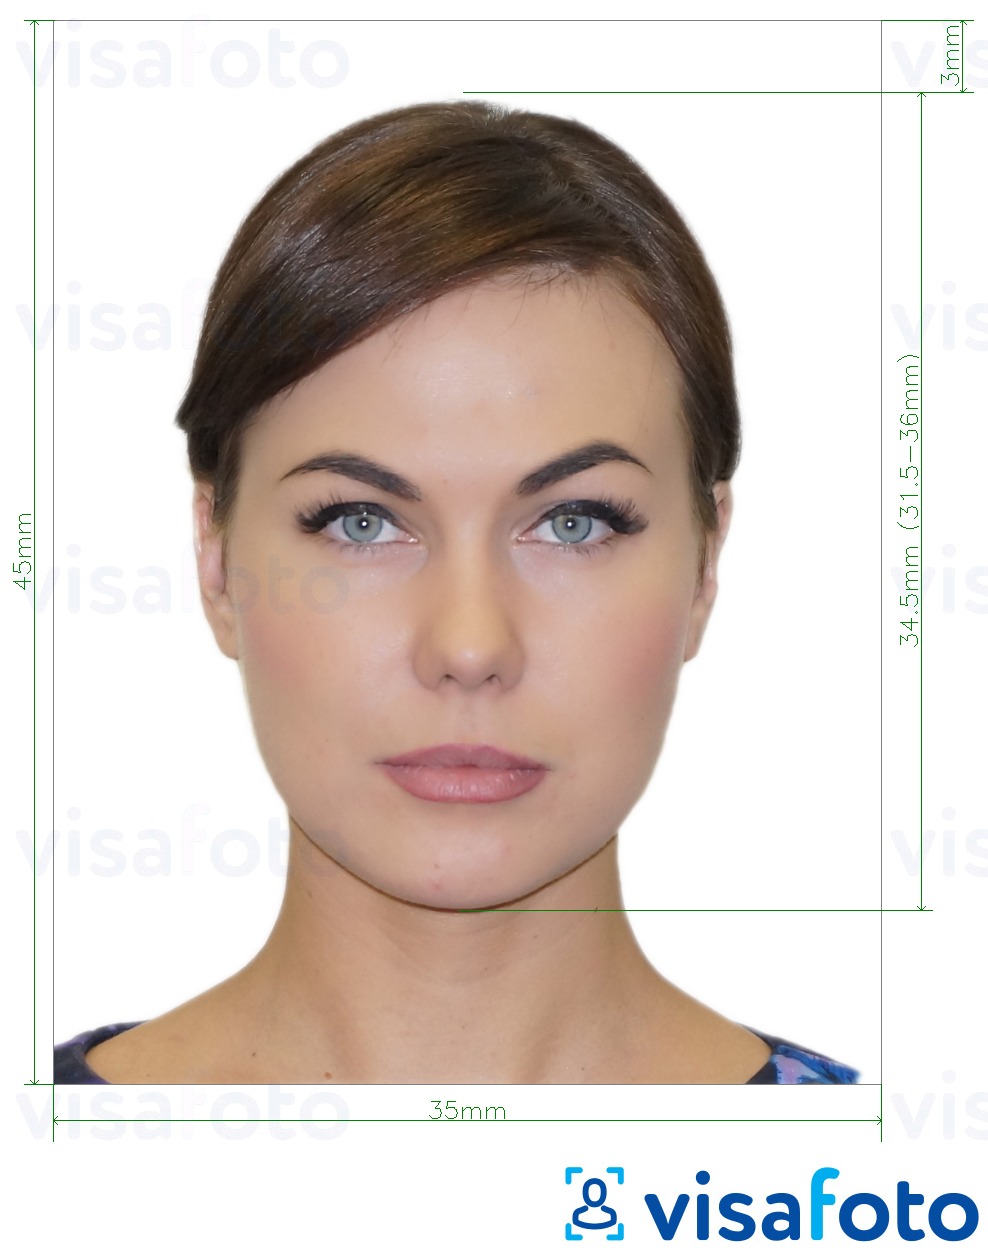 Example of photo for UK ID / residence card 45x35 mm (4.5x3.5 cm) with exact size specification